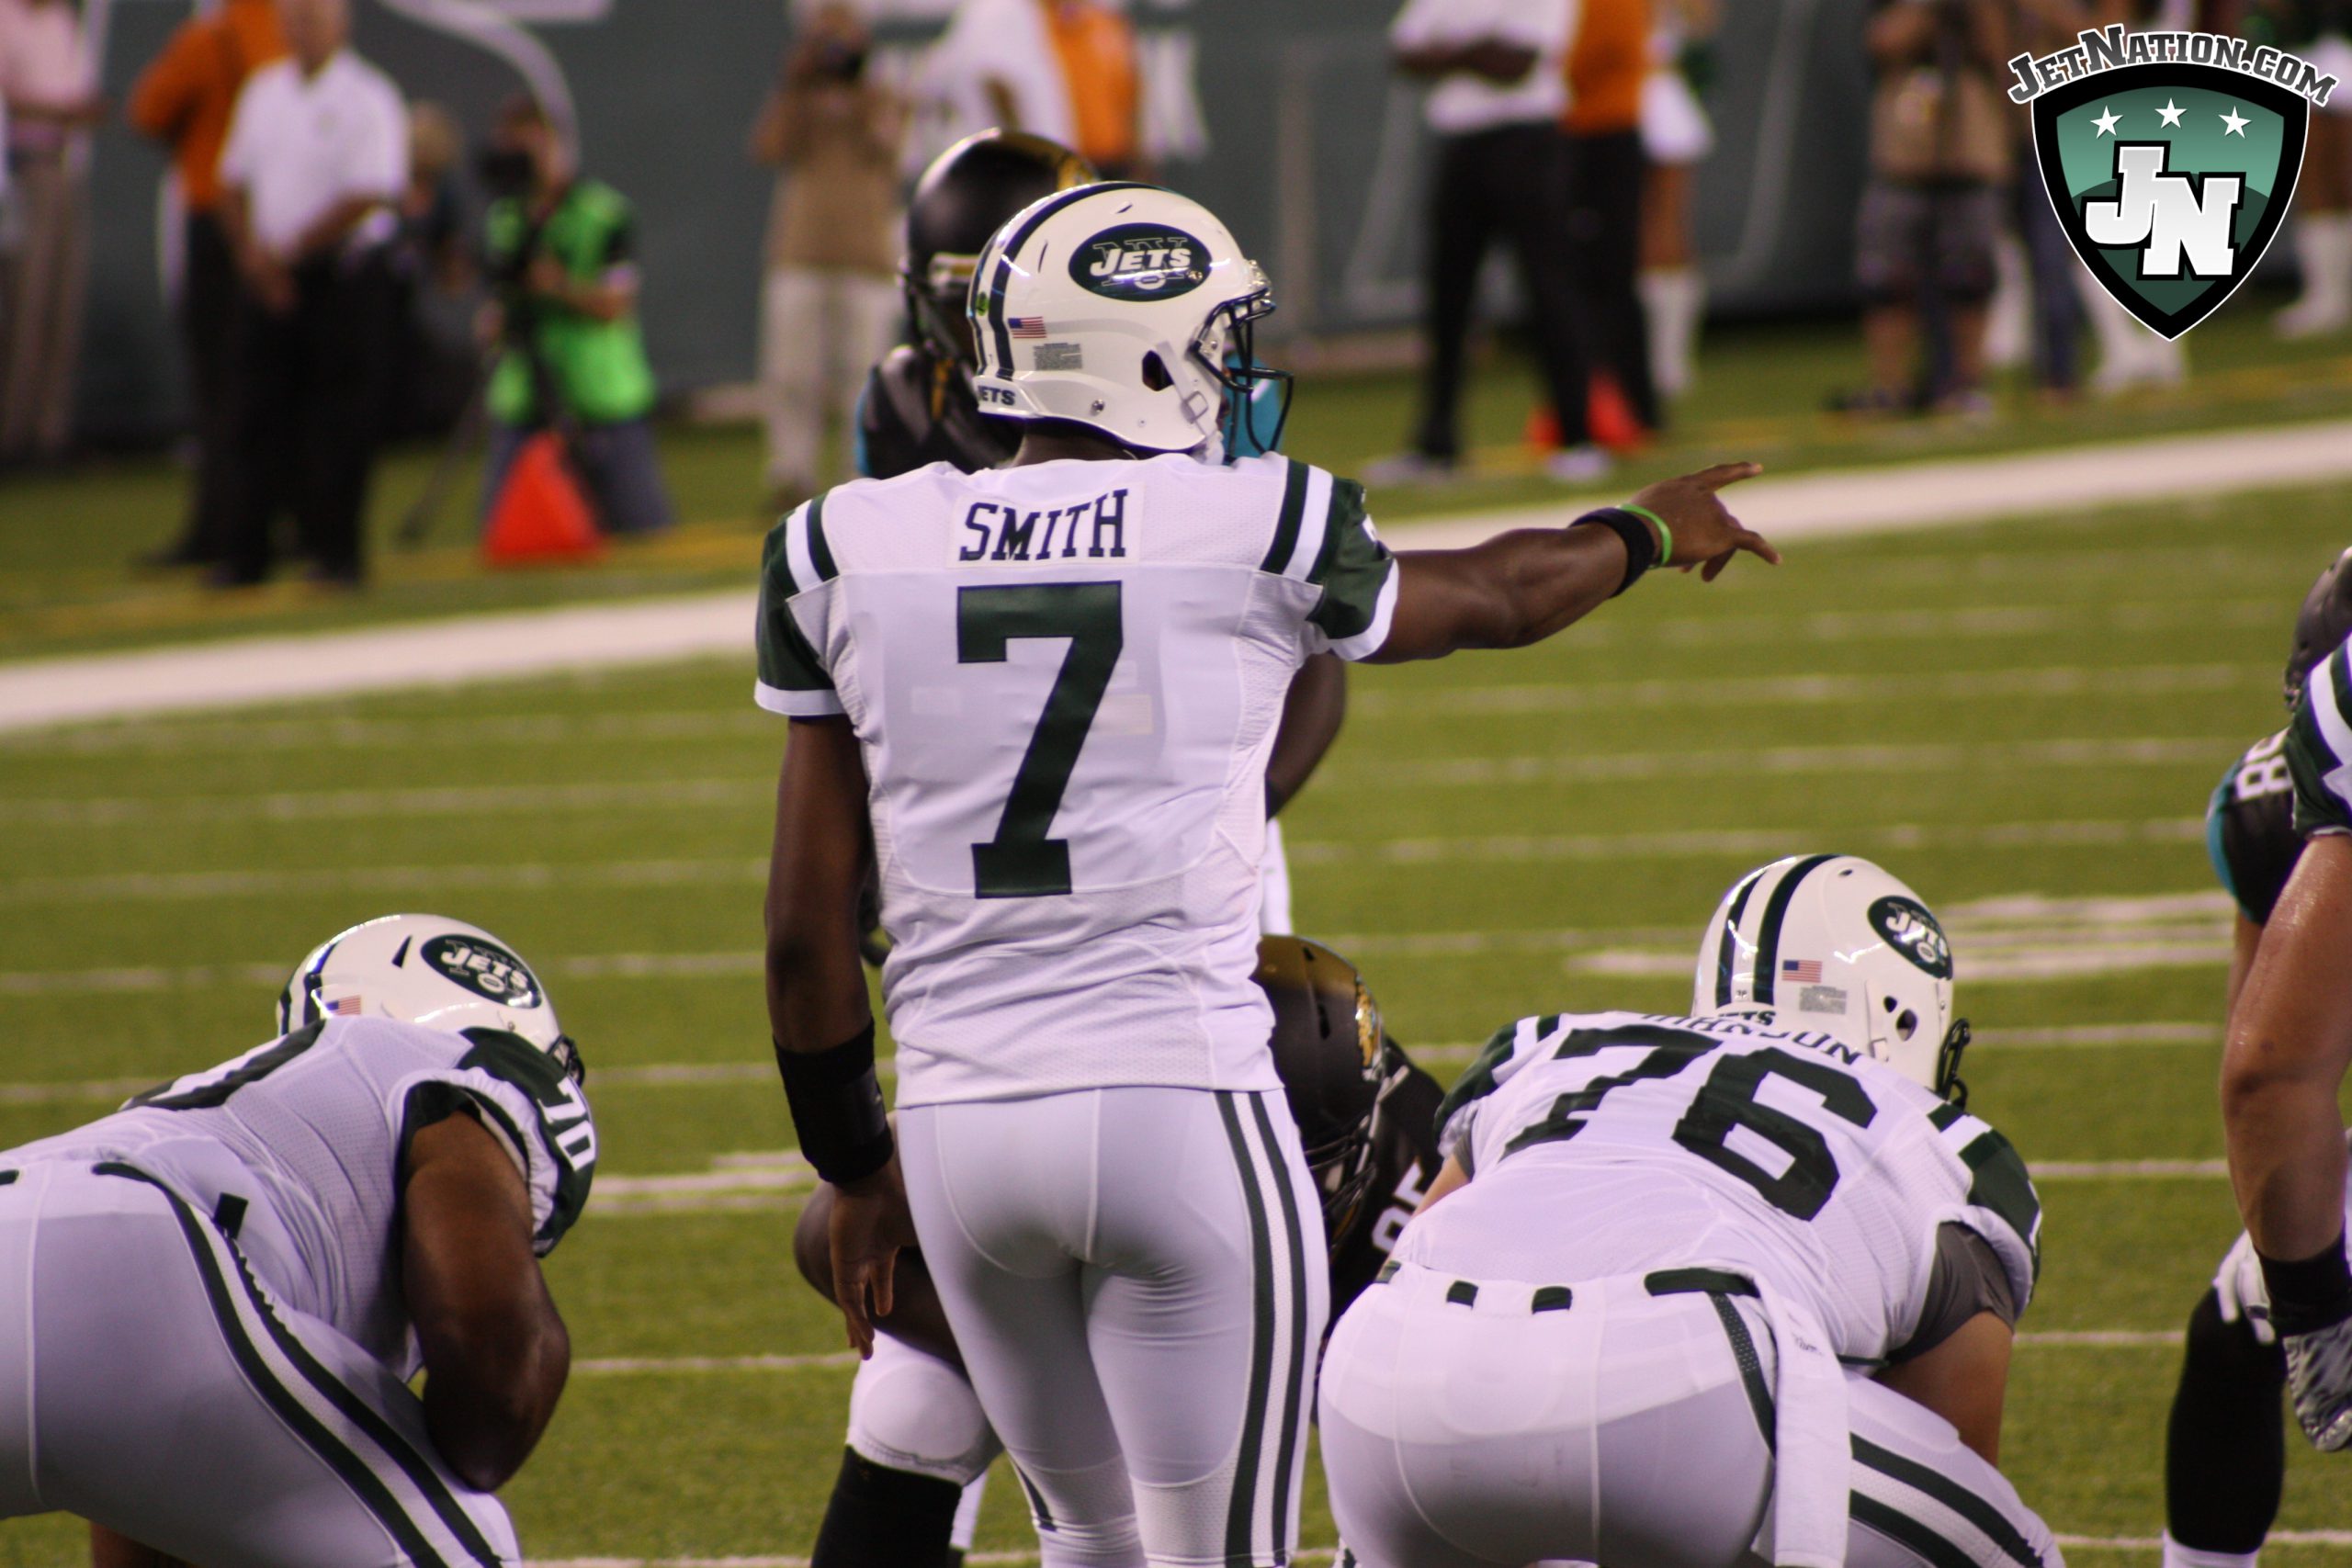 With a plethora of options on offense, Geno Smith is bound to make some highlight reel throws.